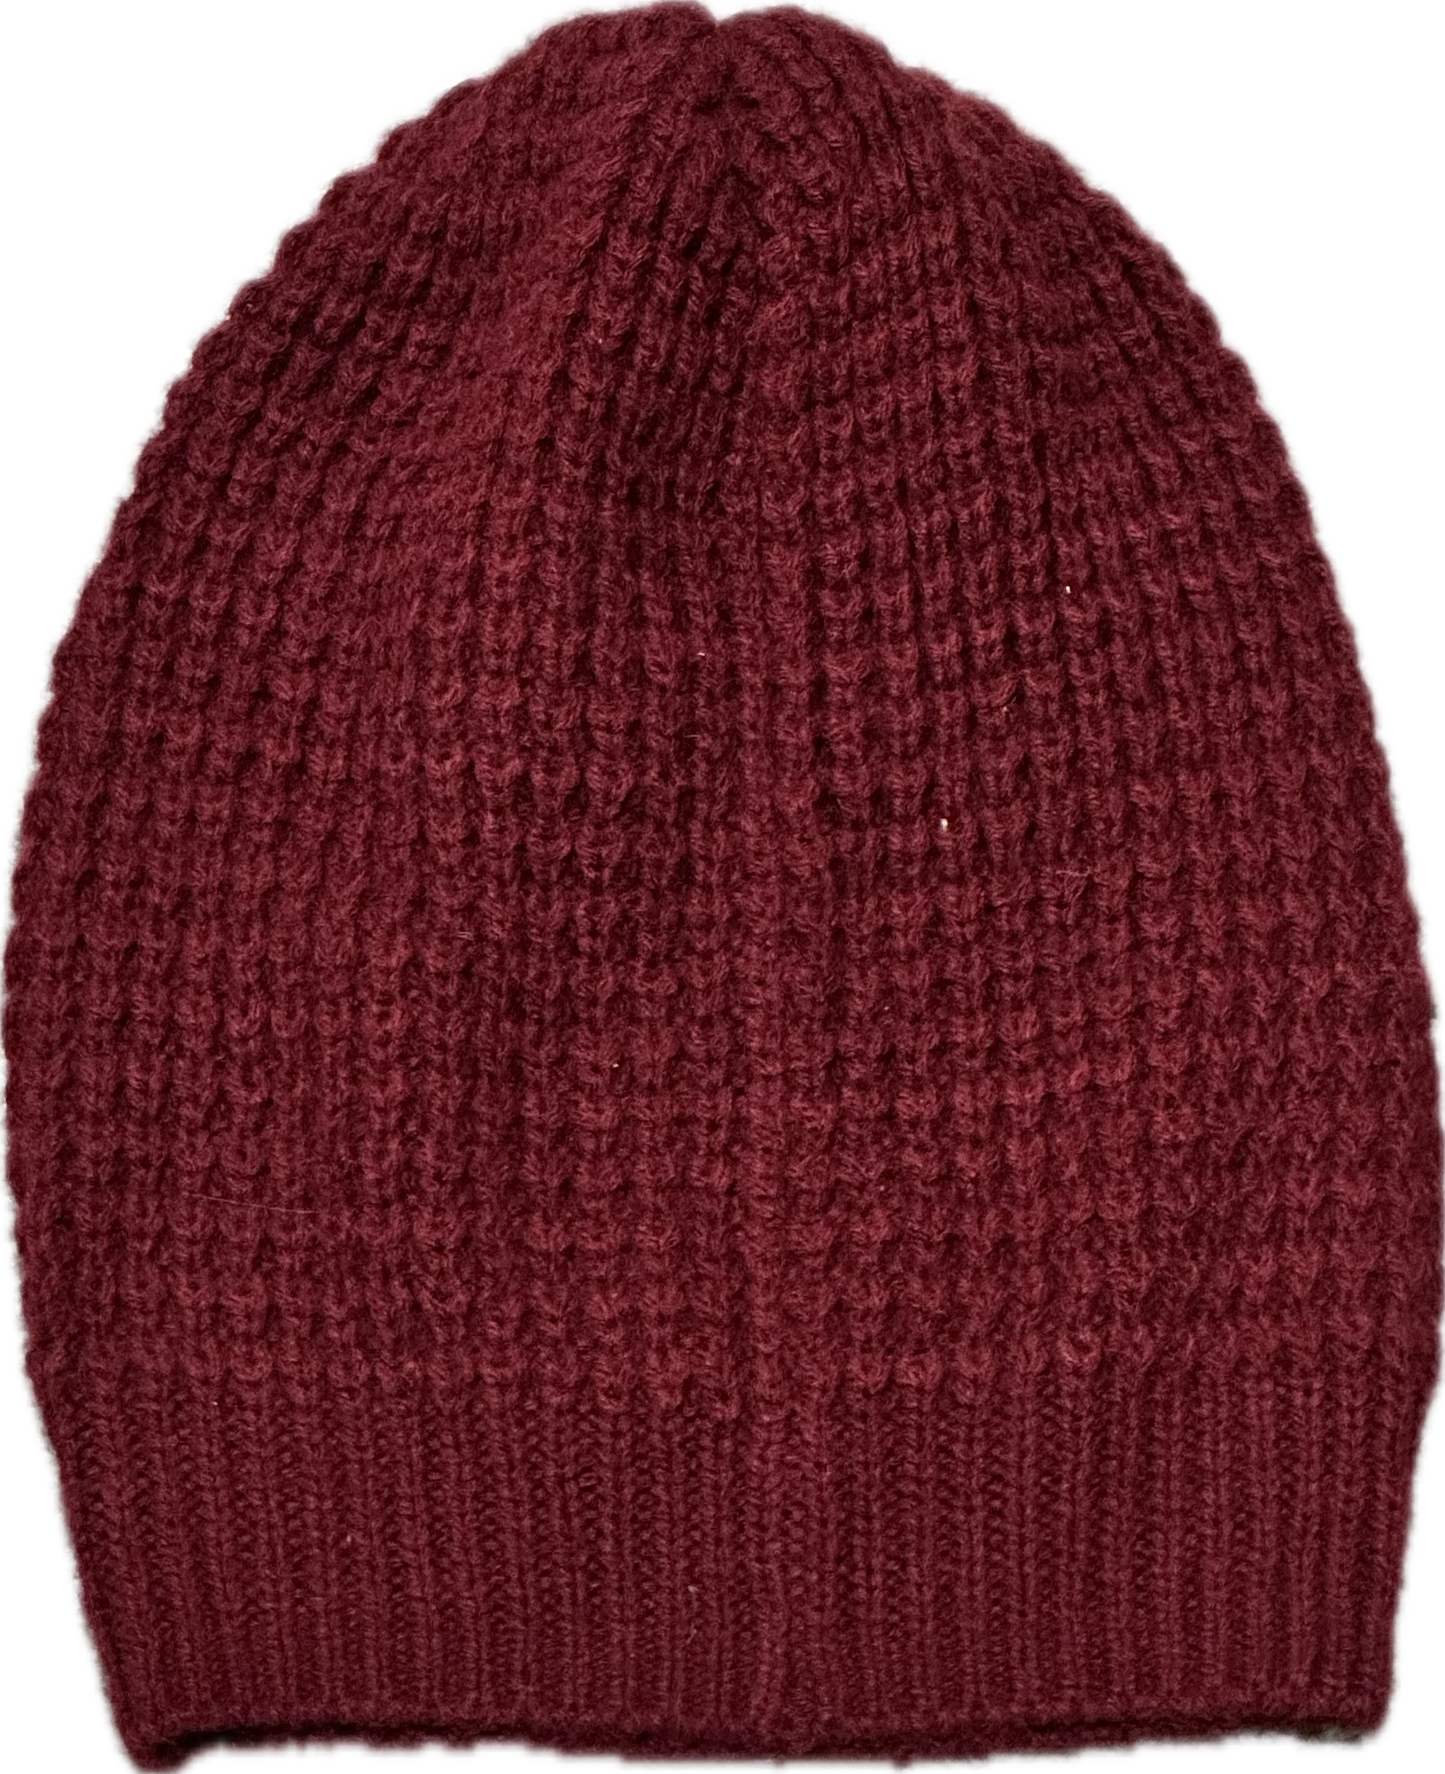 MAD MEN: Peggy's 1960s Winter Knit Hat